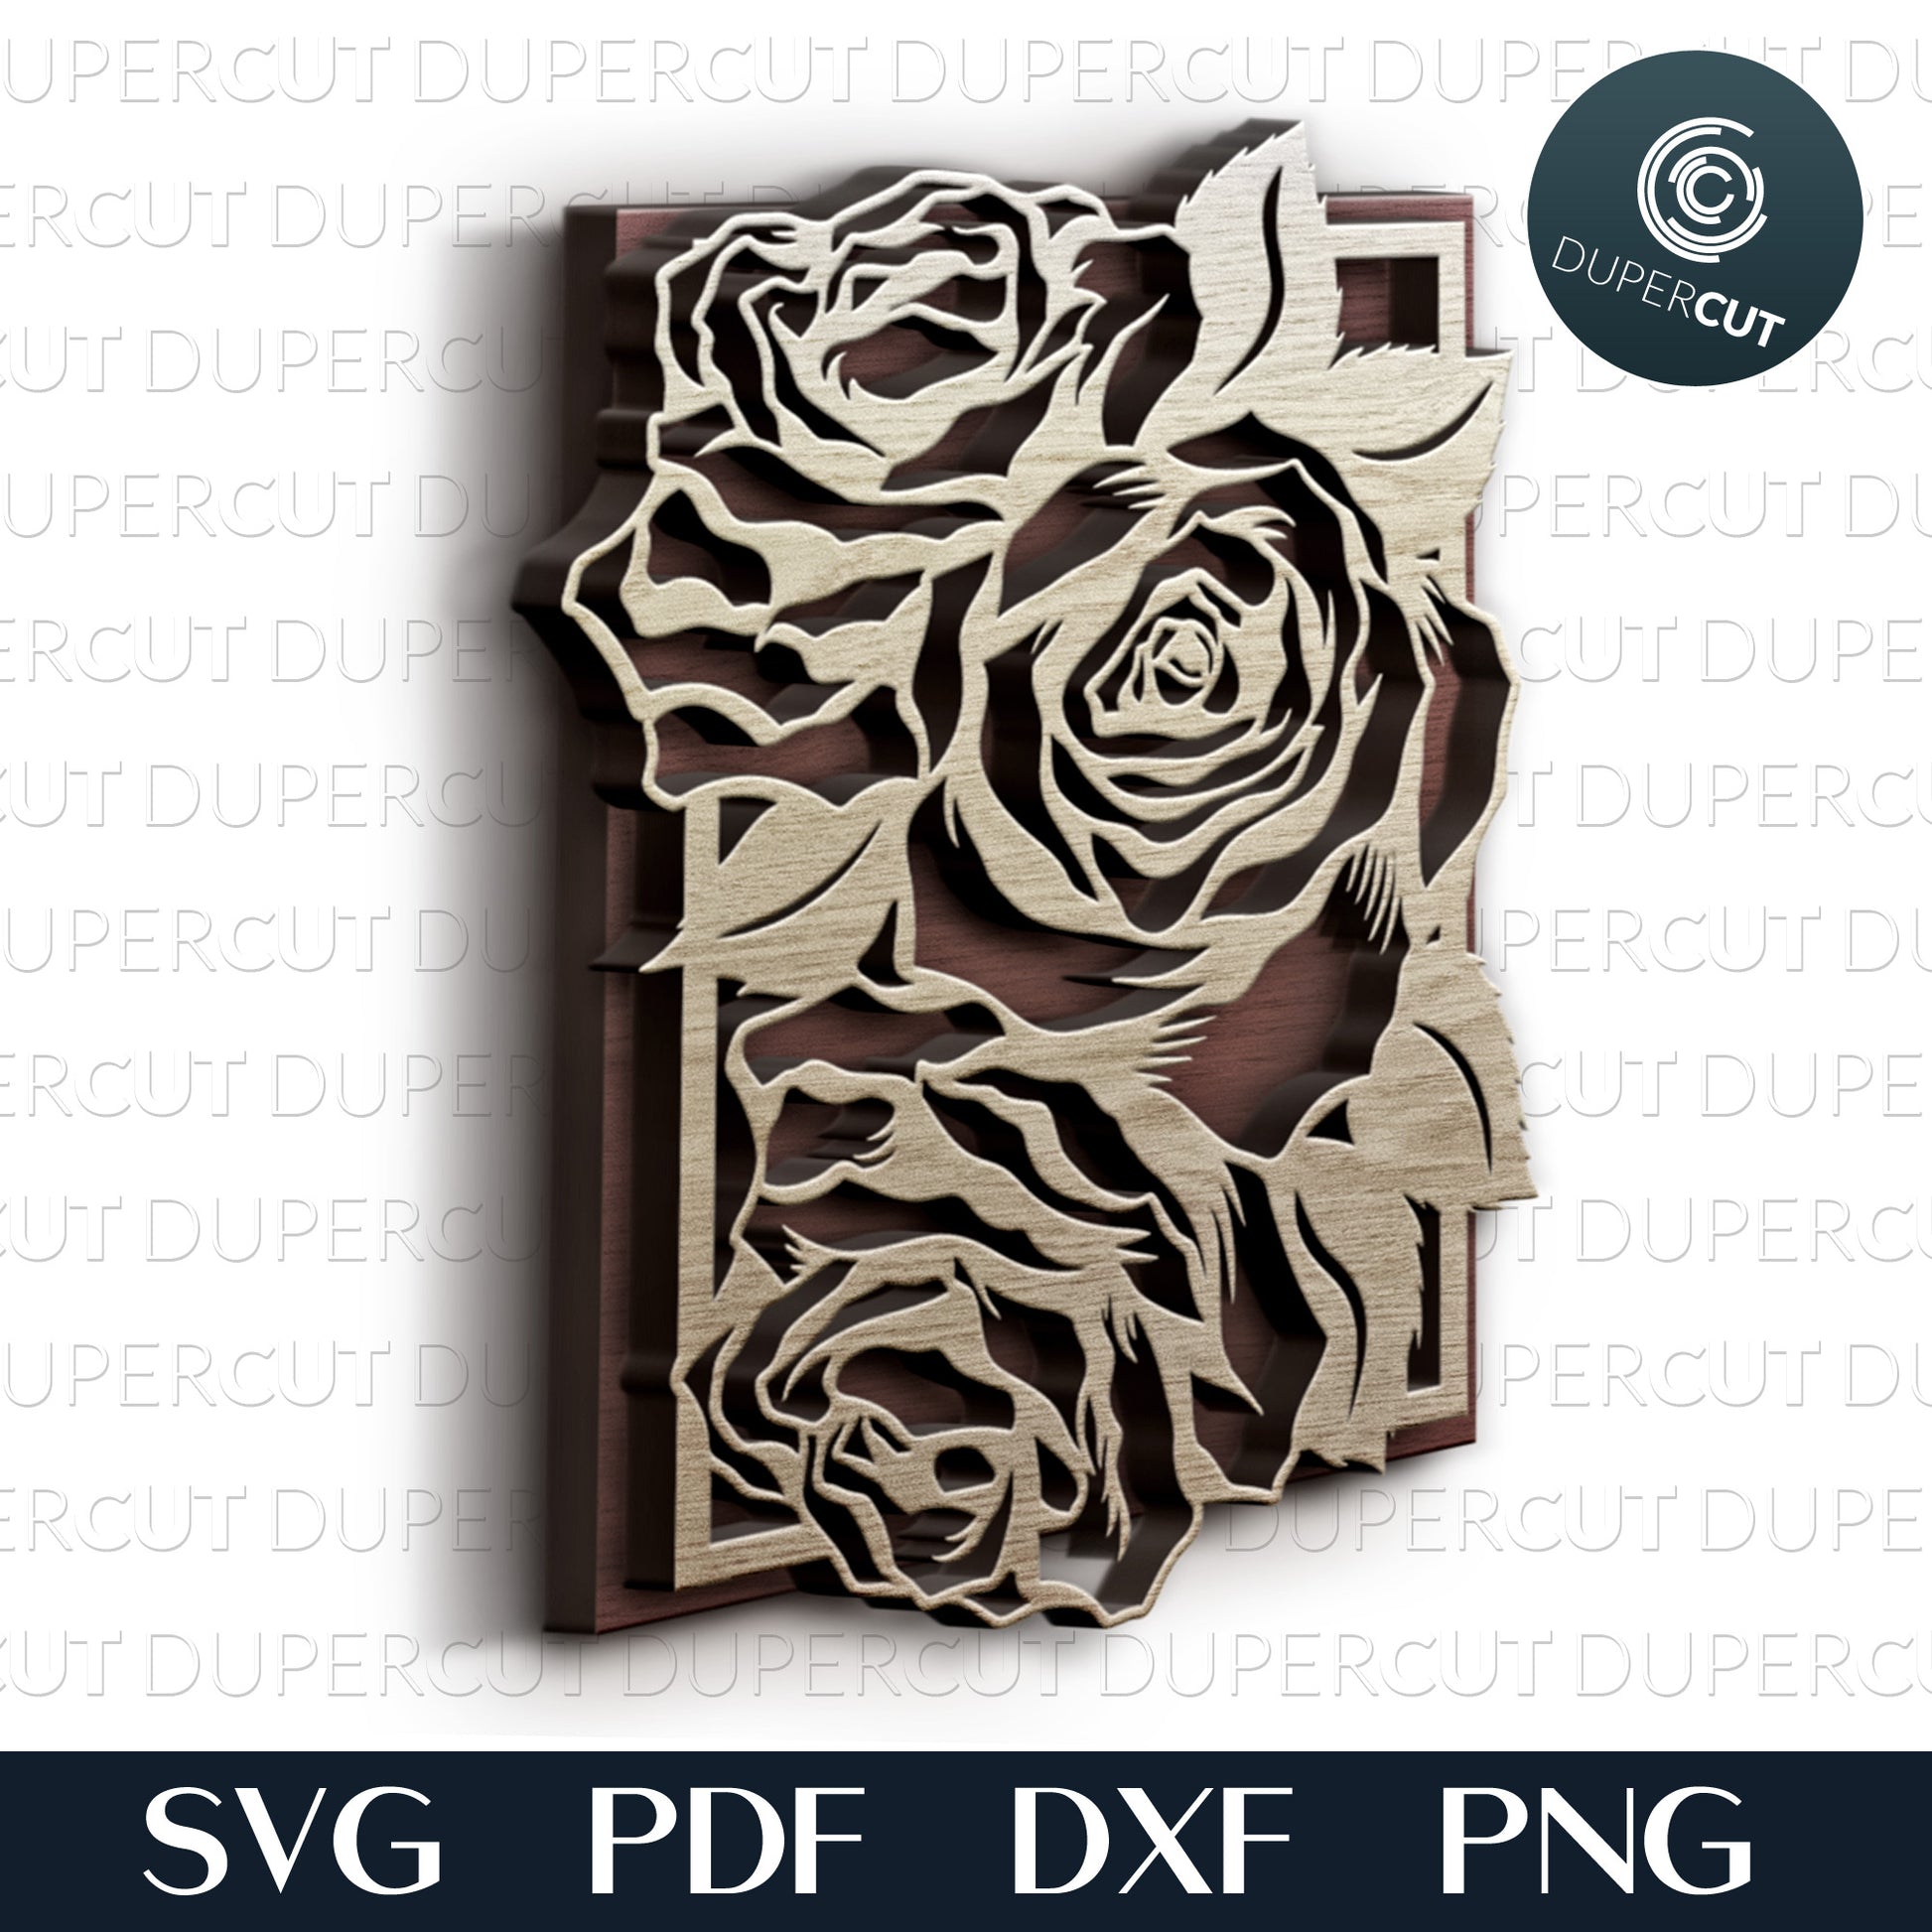 DIY wall decor, Roses layered design by DuperCut. SVG PNG DXF cutting files for Glowforge, Cricut, Silhouette cameo, laser engraving.